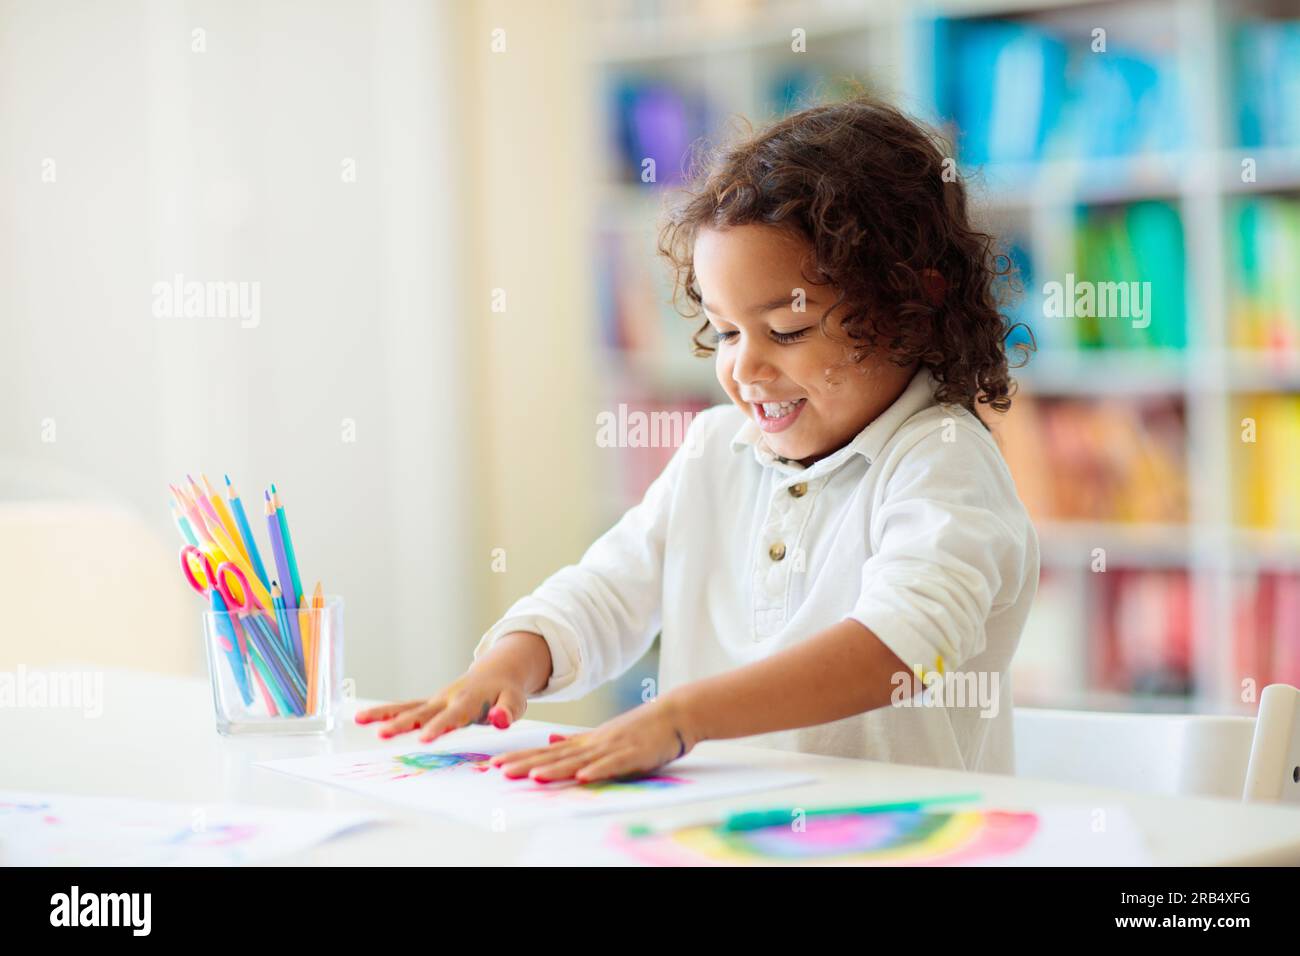 Kids paint. Child painting. Little boy drawing. Stock Photo by